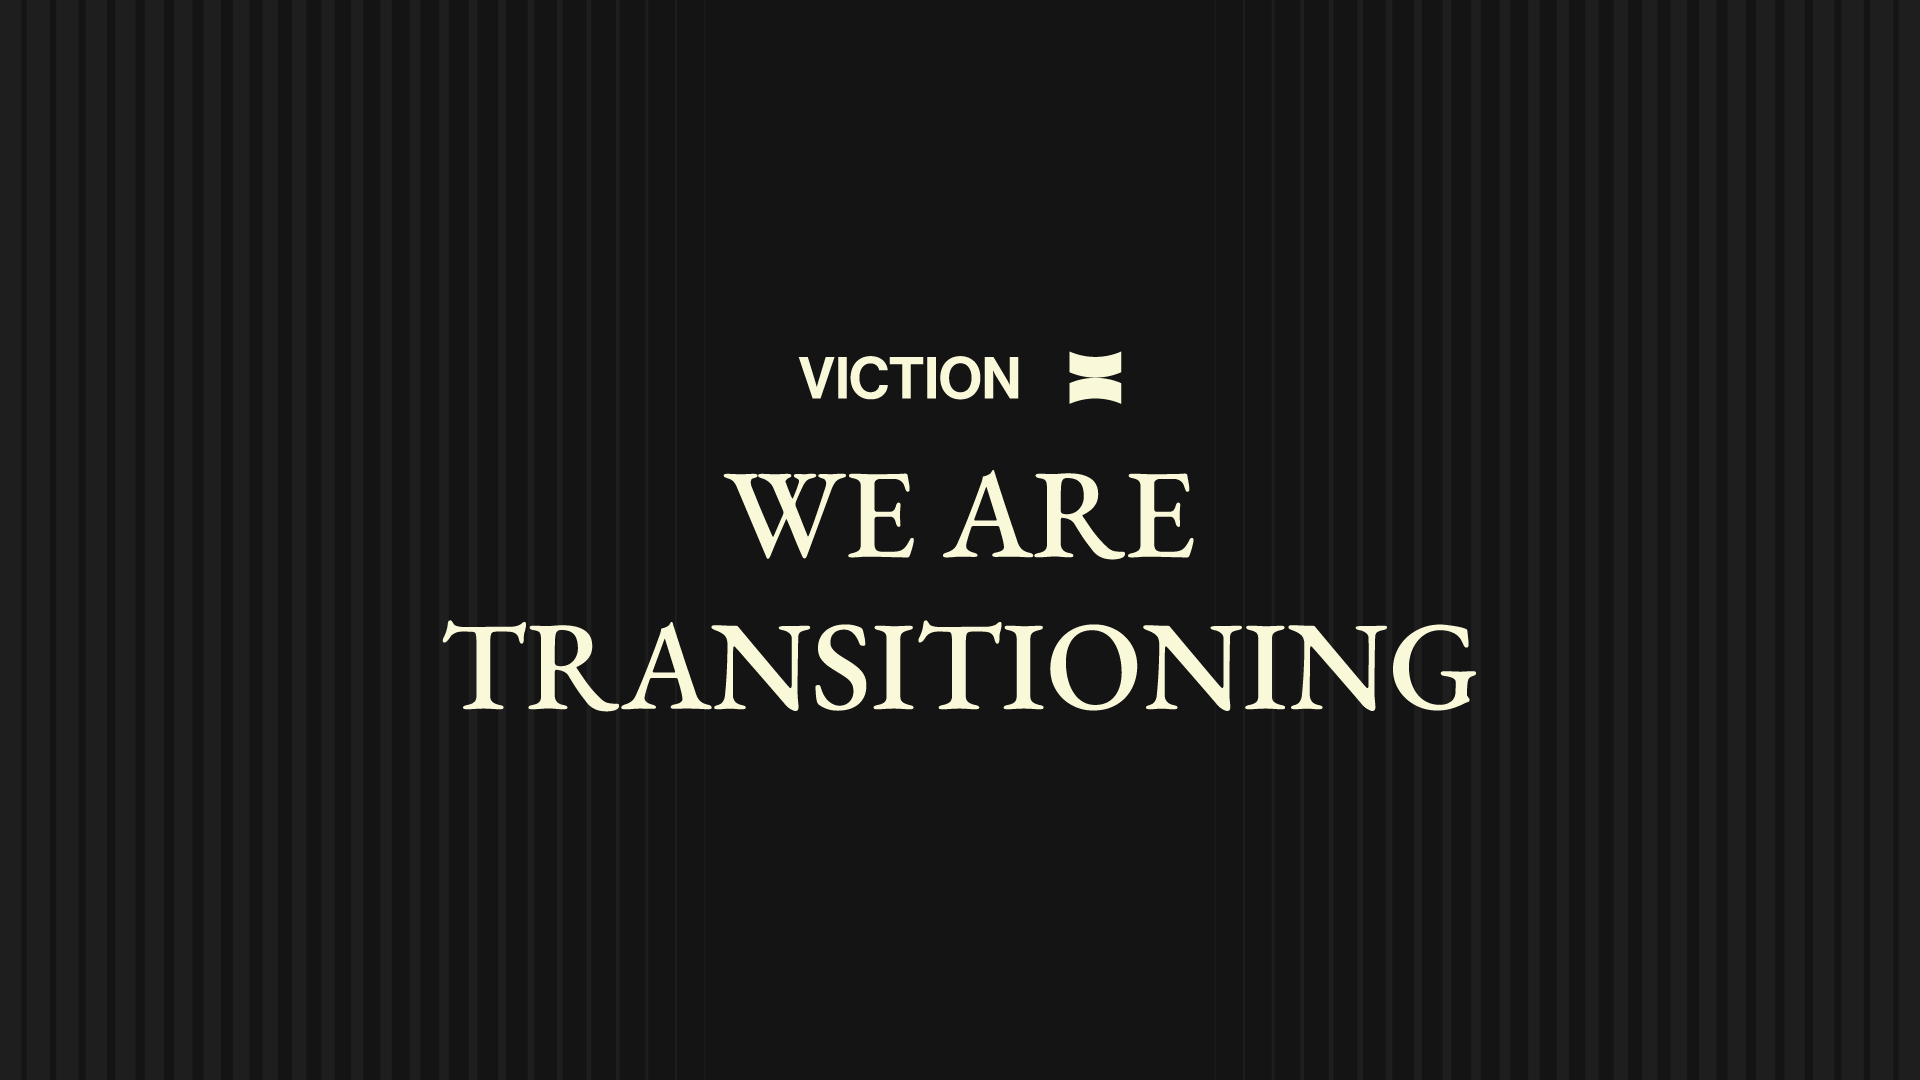 Viction Transition Process: Important Changes and Updates